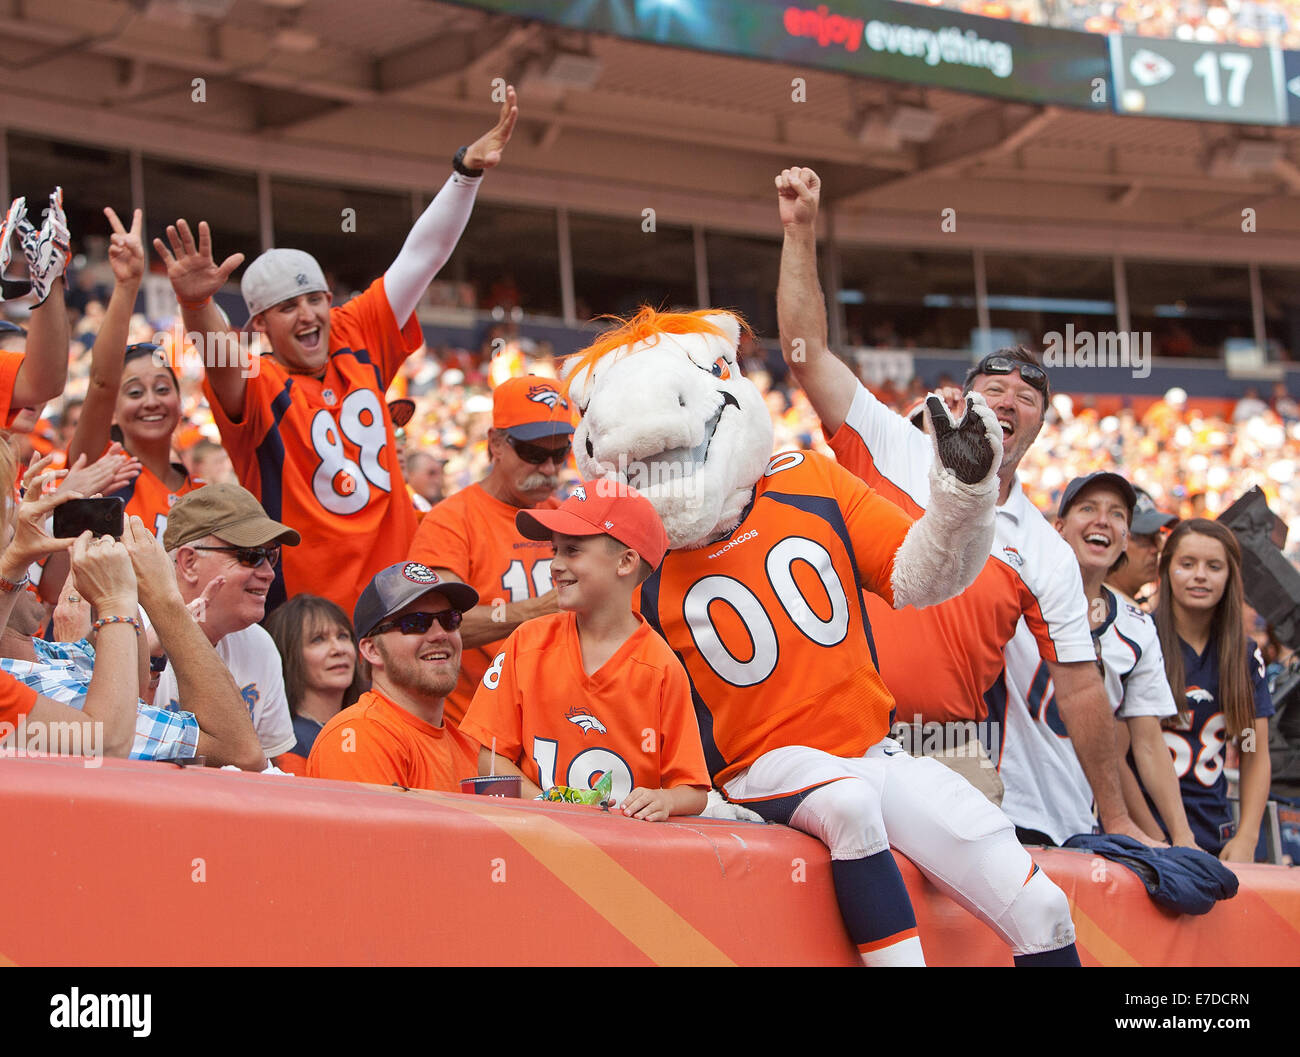 Denver, Colorado, USA. 14th Sep, 2014. Broncos Mascot MILES jumps into the North Stands to celebrate with fans after the Broncos score on a TD drive during the 2nd. half at Sports Authority Field at Mile High Sunday afternoon. The Broncos beat the Chiefs 24-17. Credit:  Hector Acevedo/ZUMA Wire/Alamy Live News Stock Photo